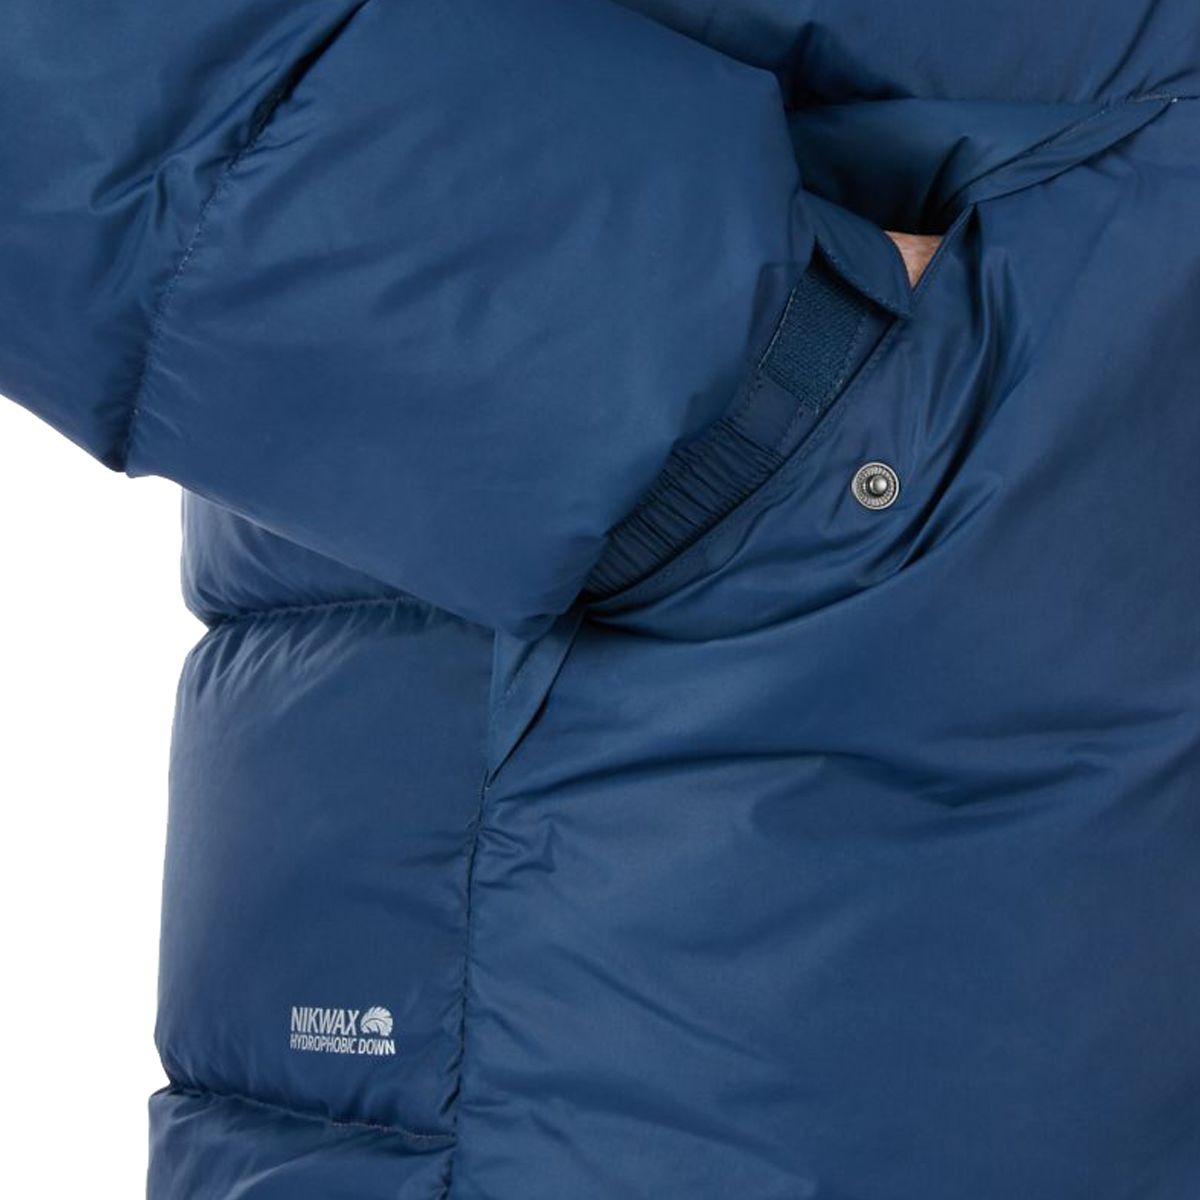 Rab Andes Down Jacket - Men's | Backcountry.com